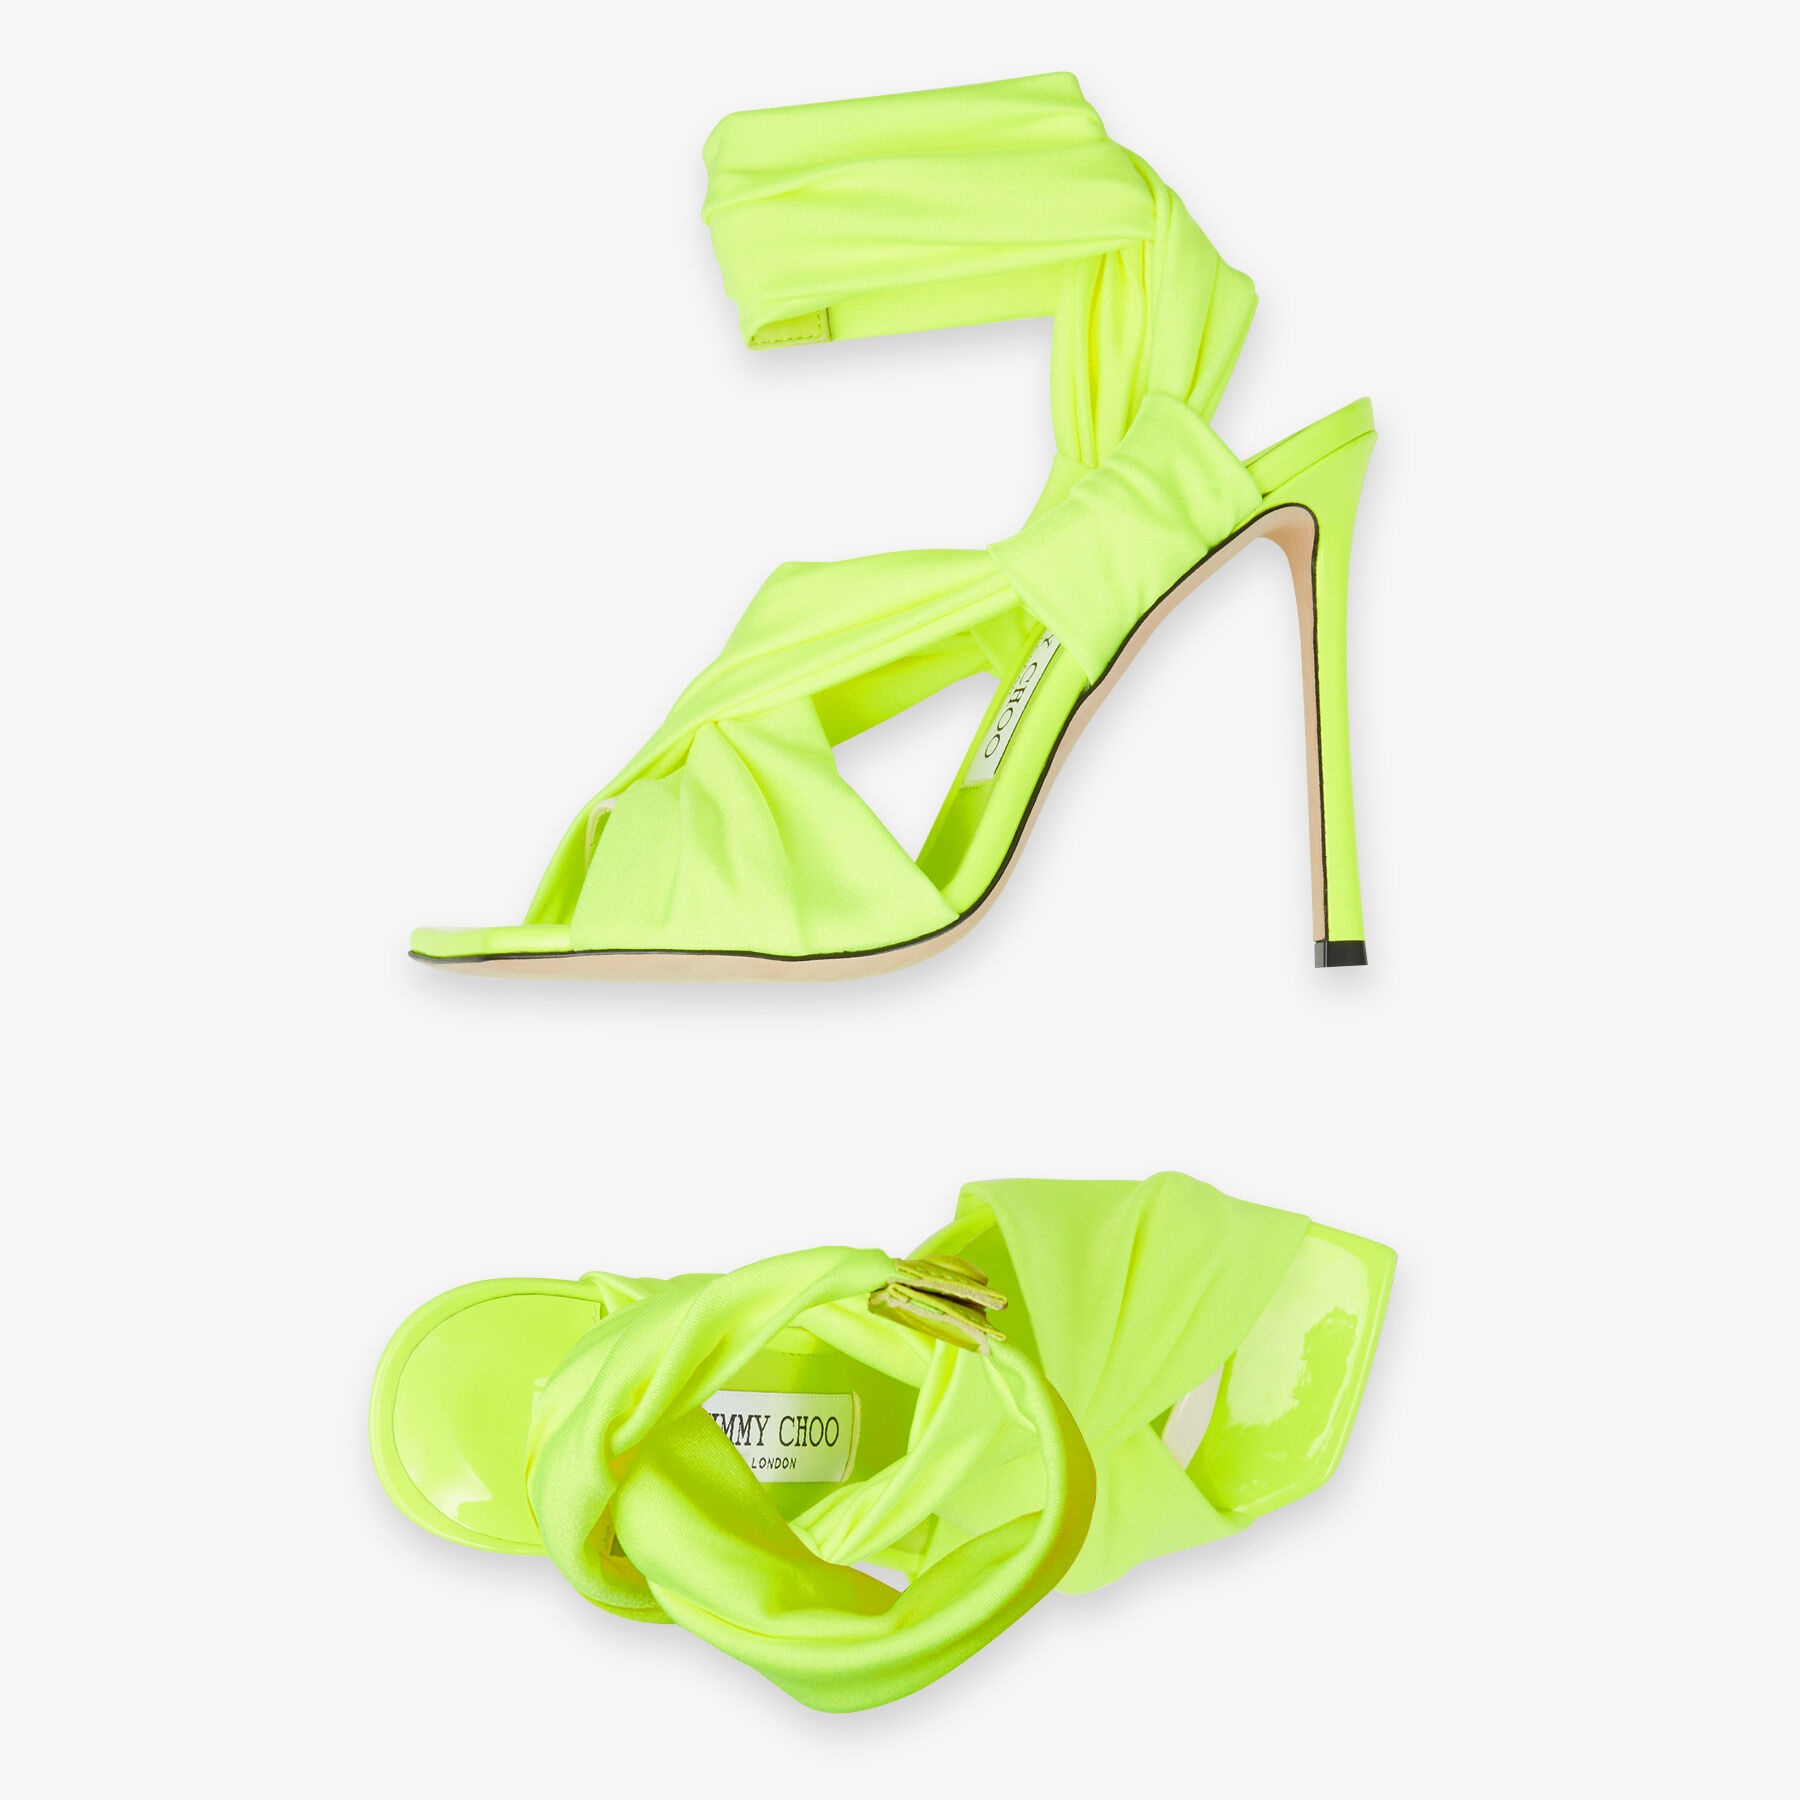 Neoma 110
Neon Apple Green Glossy Jersey Sandals - 6